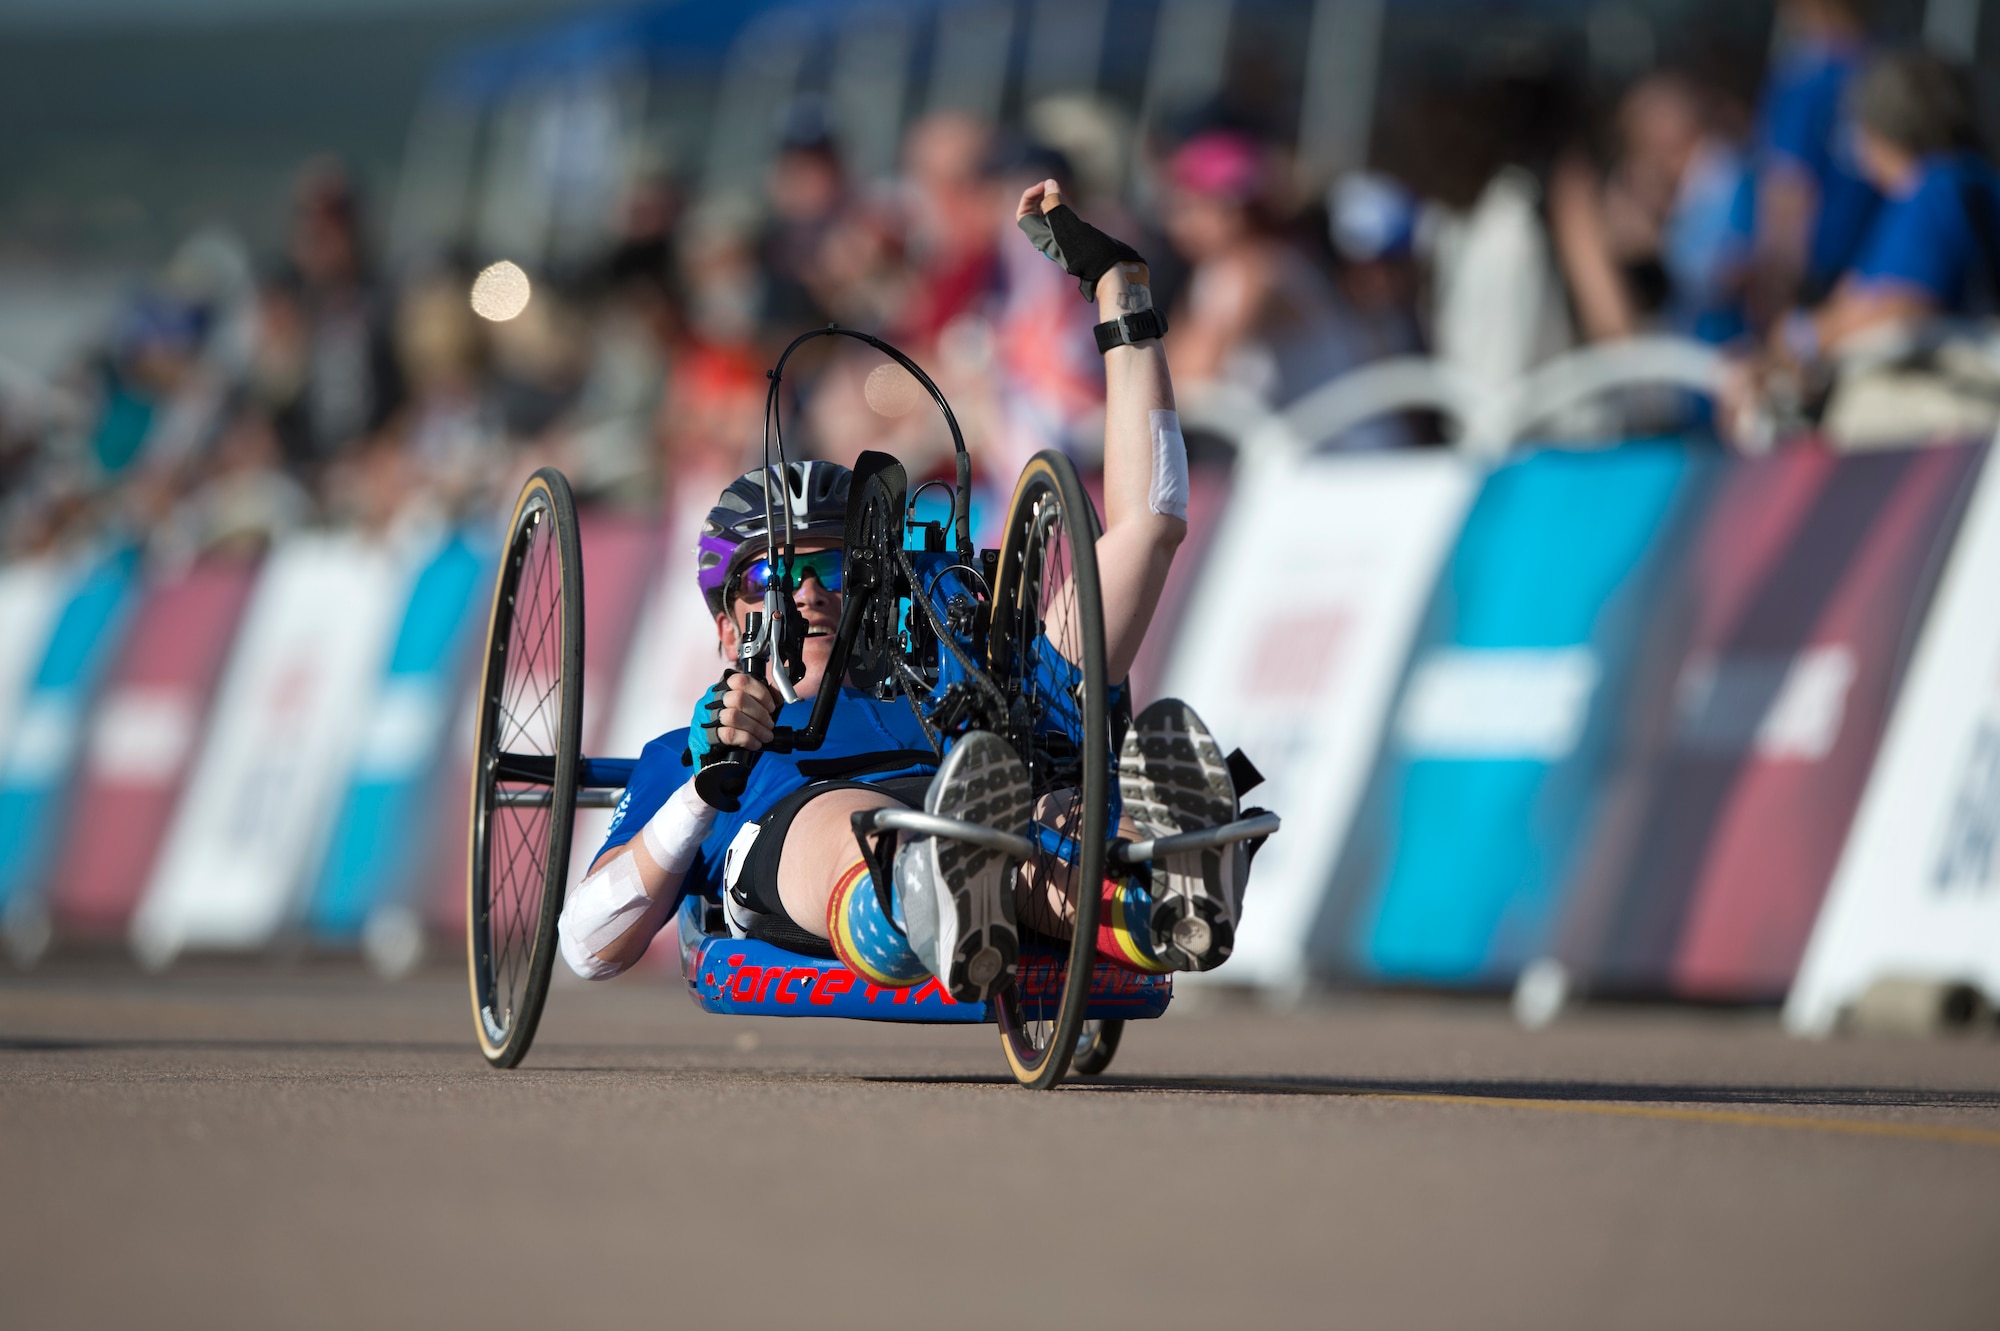 Master Sgt. Lisa Goad, Team Air Force athlete, reacts to finishing the 2018 DoD Warrior Games hand-cycling competition at the U.S. Air Force Academy in Colorado Springs, Colo. on June 6. Goad was involved in a crash during her first hand-cycling race, and took home the silver medal in her second race. (DoD photo by EJ Hersom)